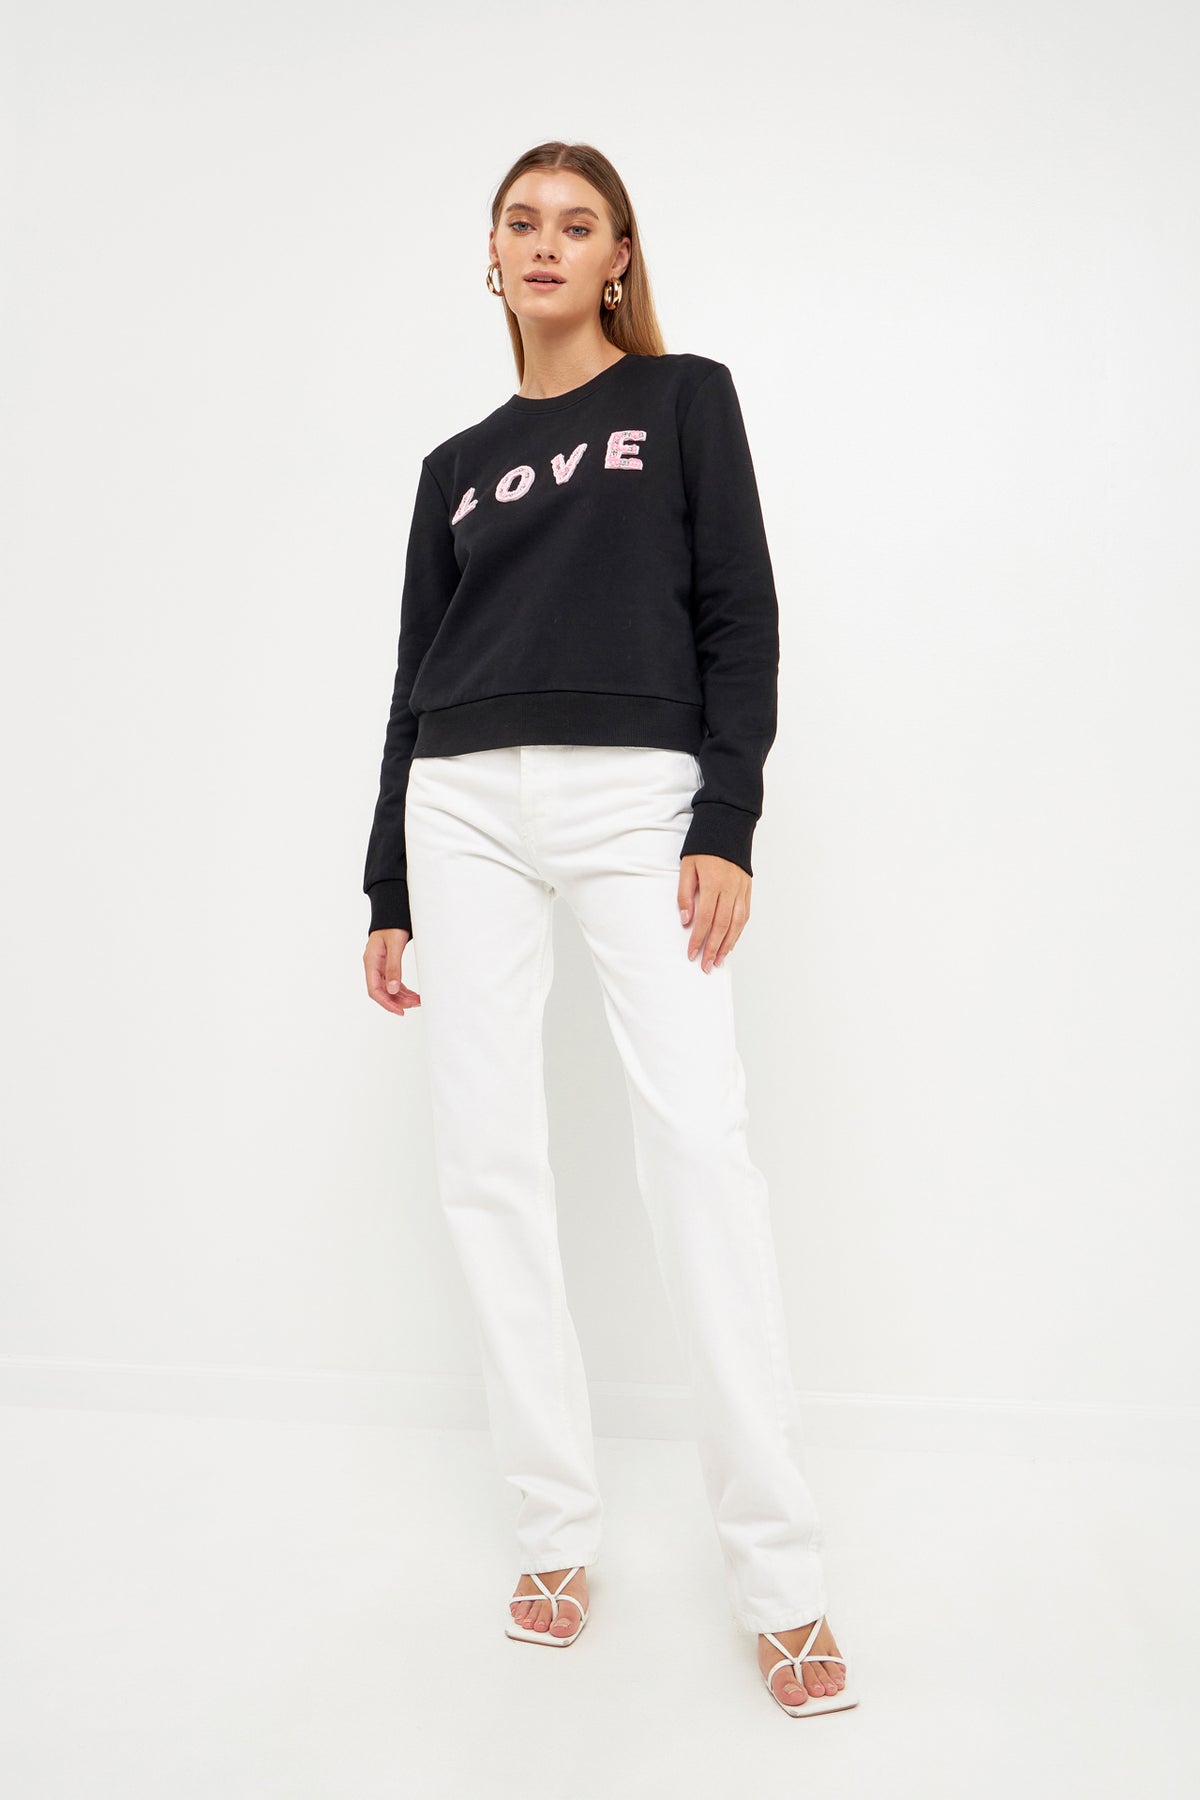 ENDLESS ROSE - Love Beaded Sweatshirt - SWEATERS & KNITS available at Objectrare